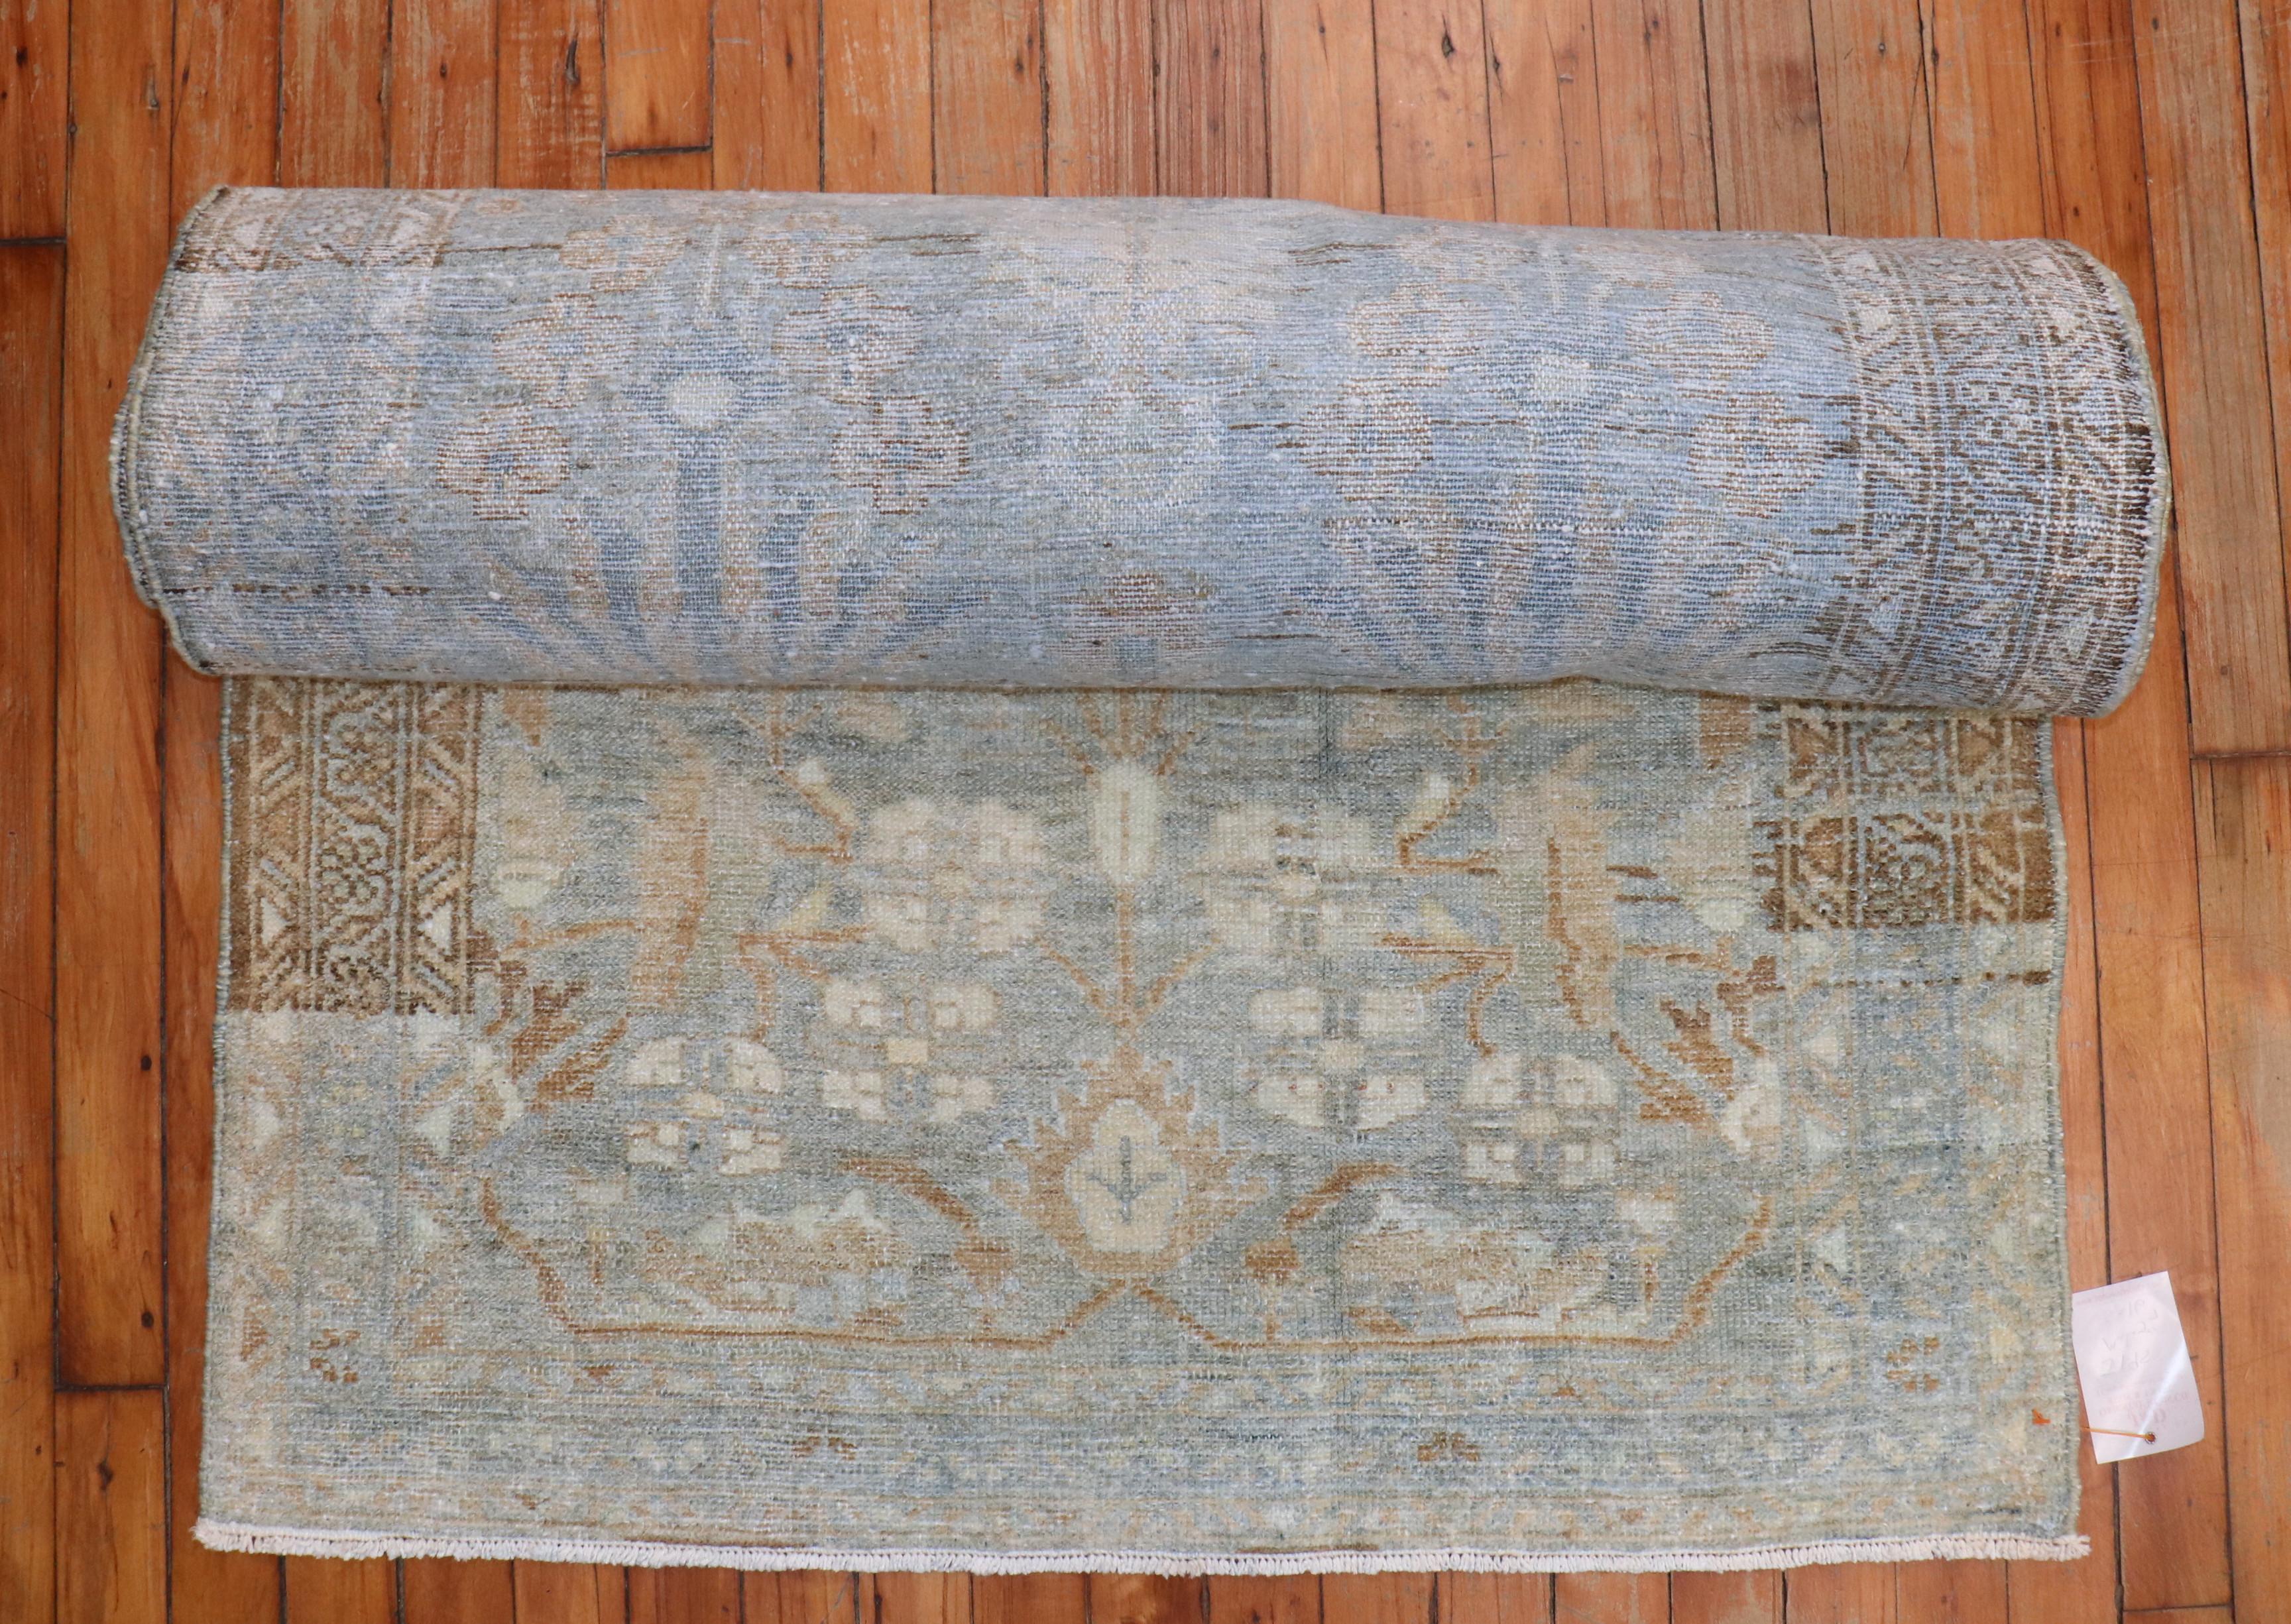 Predominant light blue Gray Persian Malayer runner from the early 20th century. Accents in light brown and silver.

Measures: 3' x 16'7